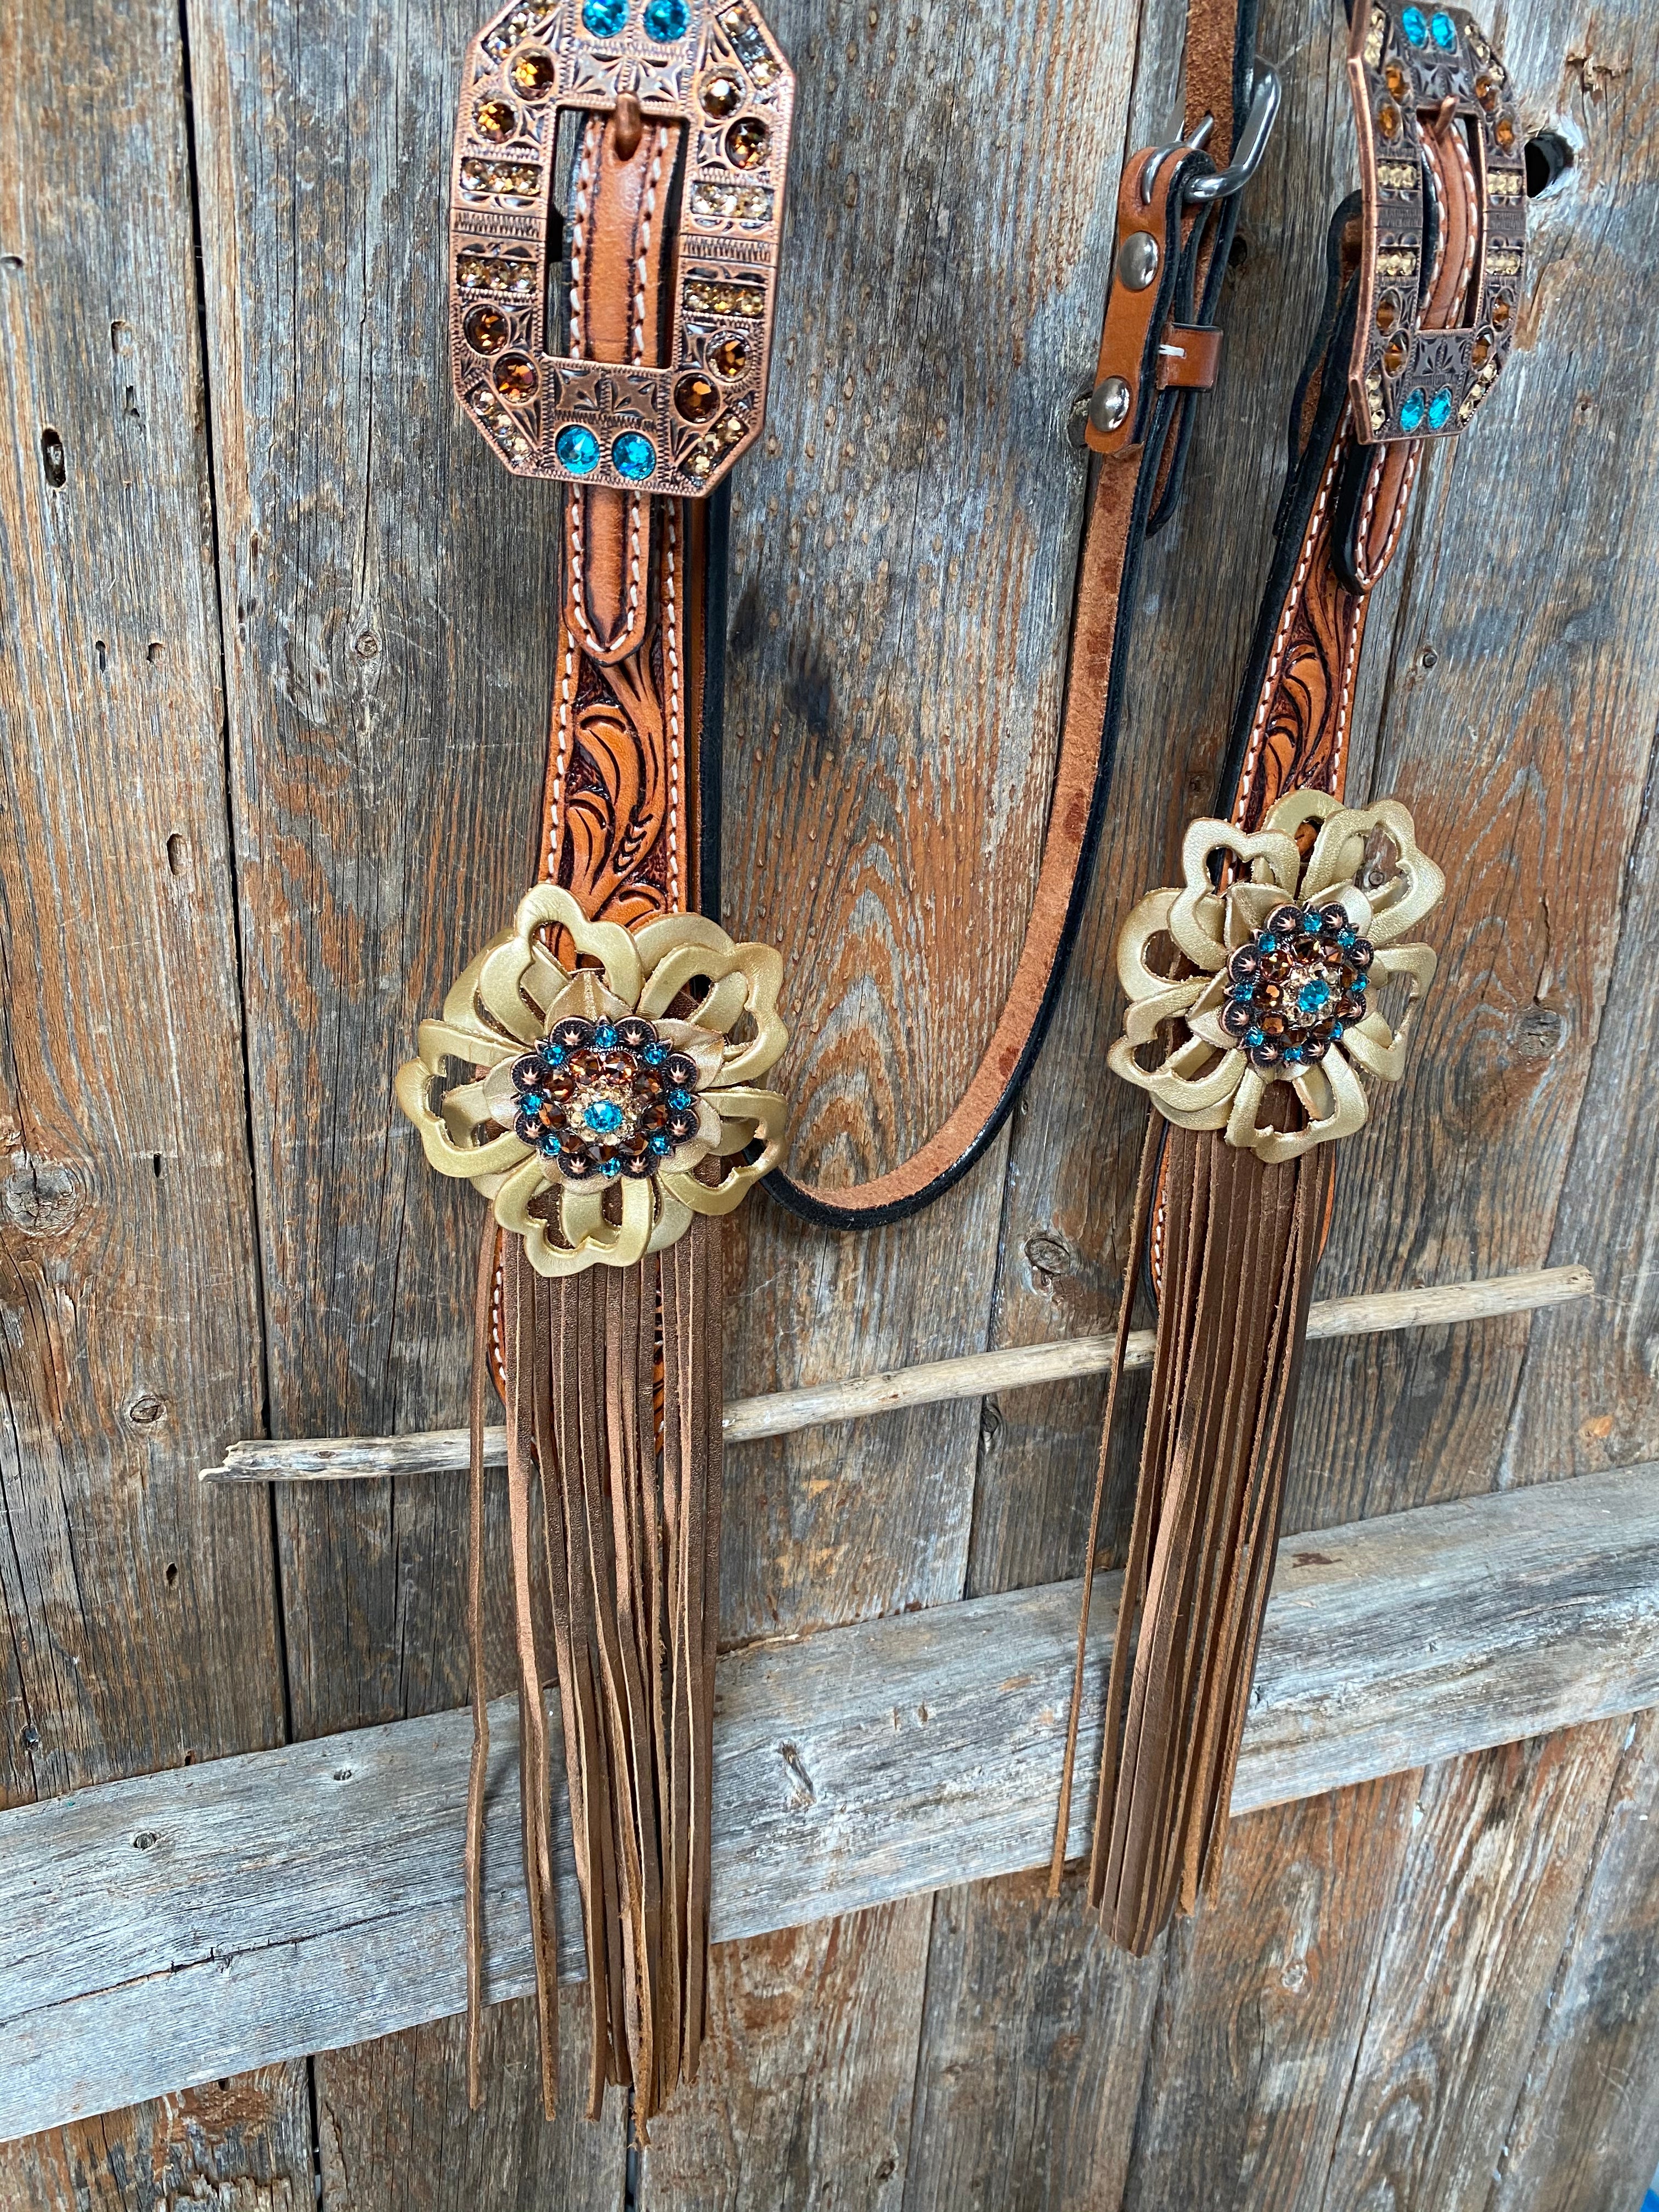 Light Oil Buckaroo/Roper Teal and Gold Browband & Breastcollar Tack Set #BBBC449 - RODEO DRIVE